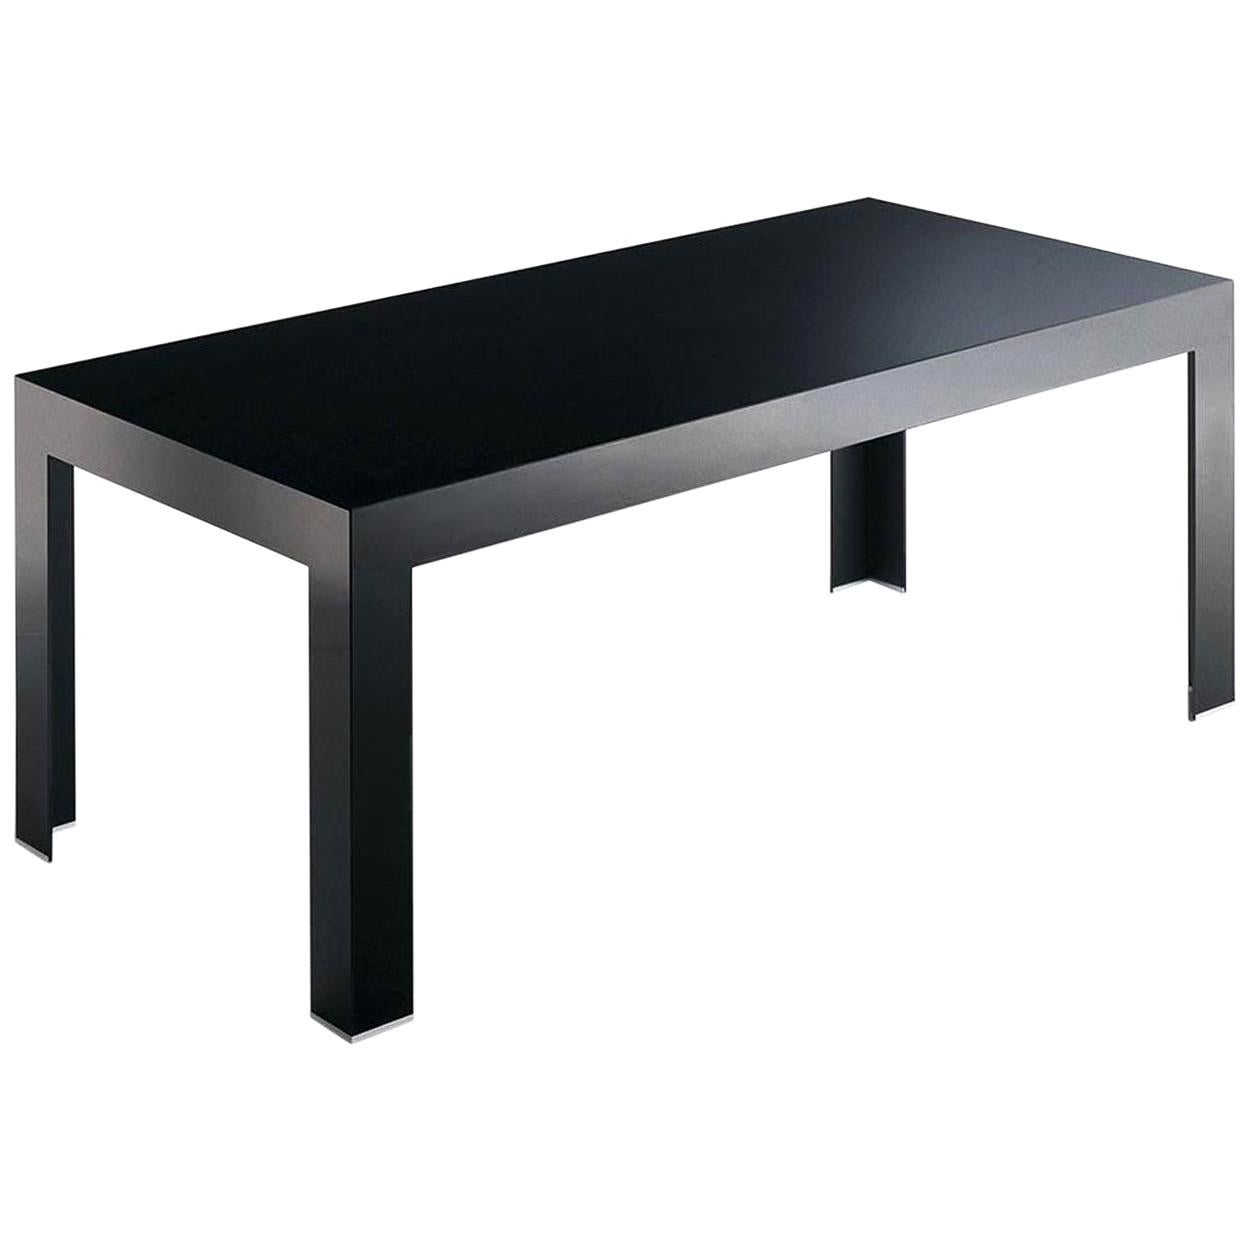 Italian Design Black Glass Dining Table in Minimal Style Contemporary Production For Sale